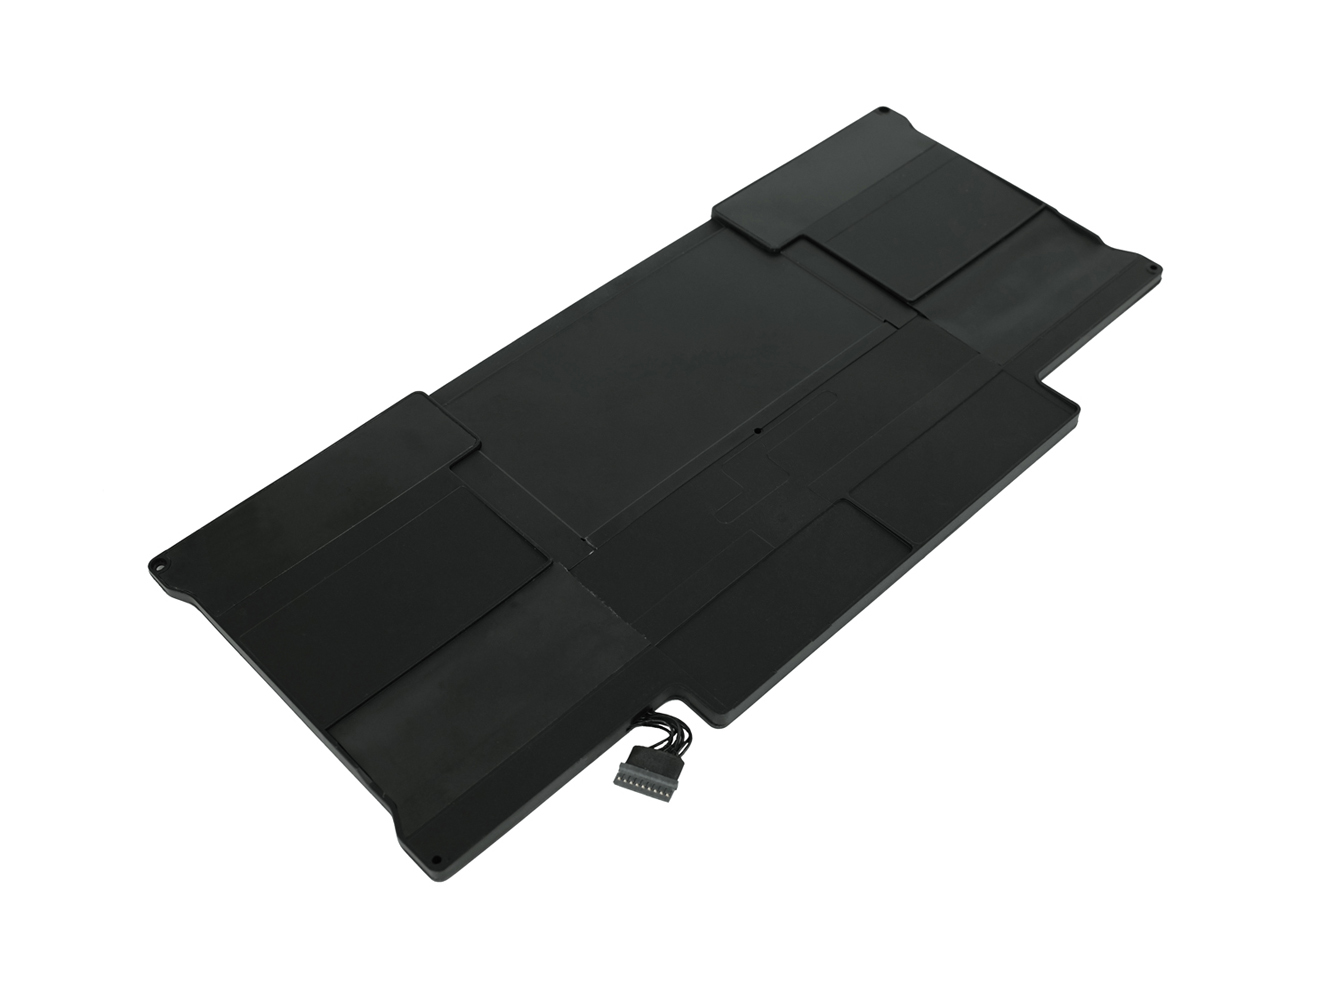 020-7379-A, A1369 replacement Laptop Battery for Apple A1369 (2010 version)  Core i5  1.6, A1369 (Mid-2011 Version)  Core i7  1.8, 7.30V